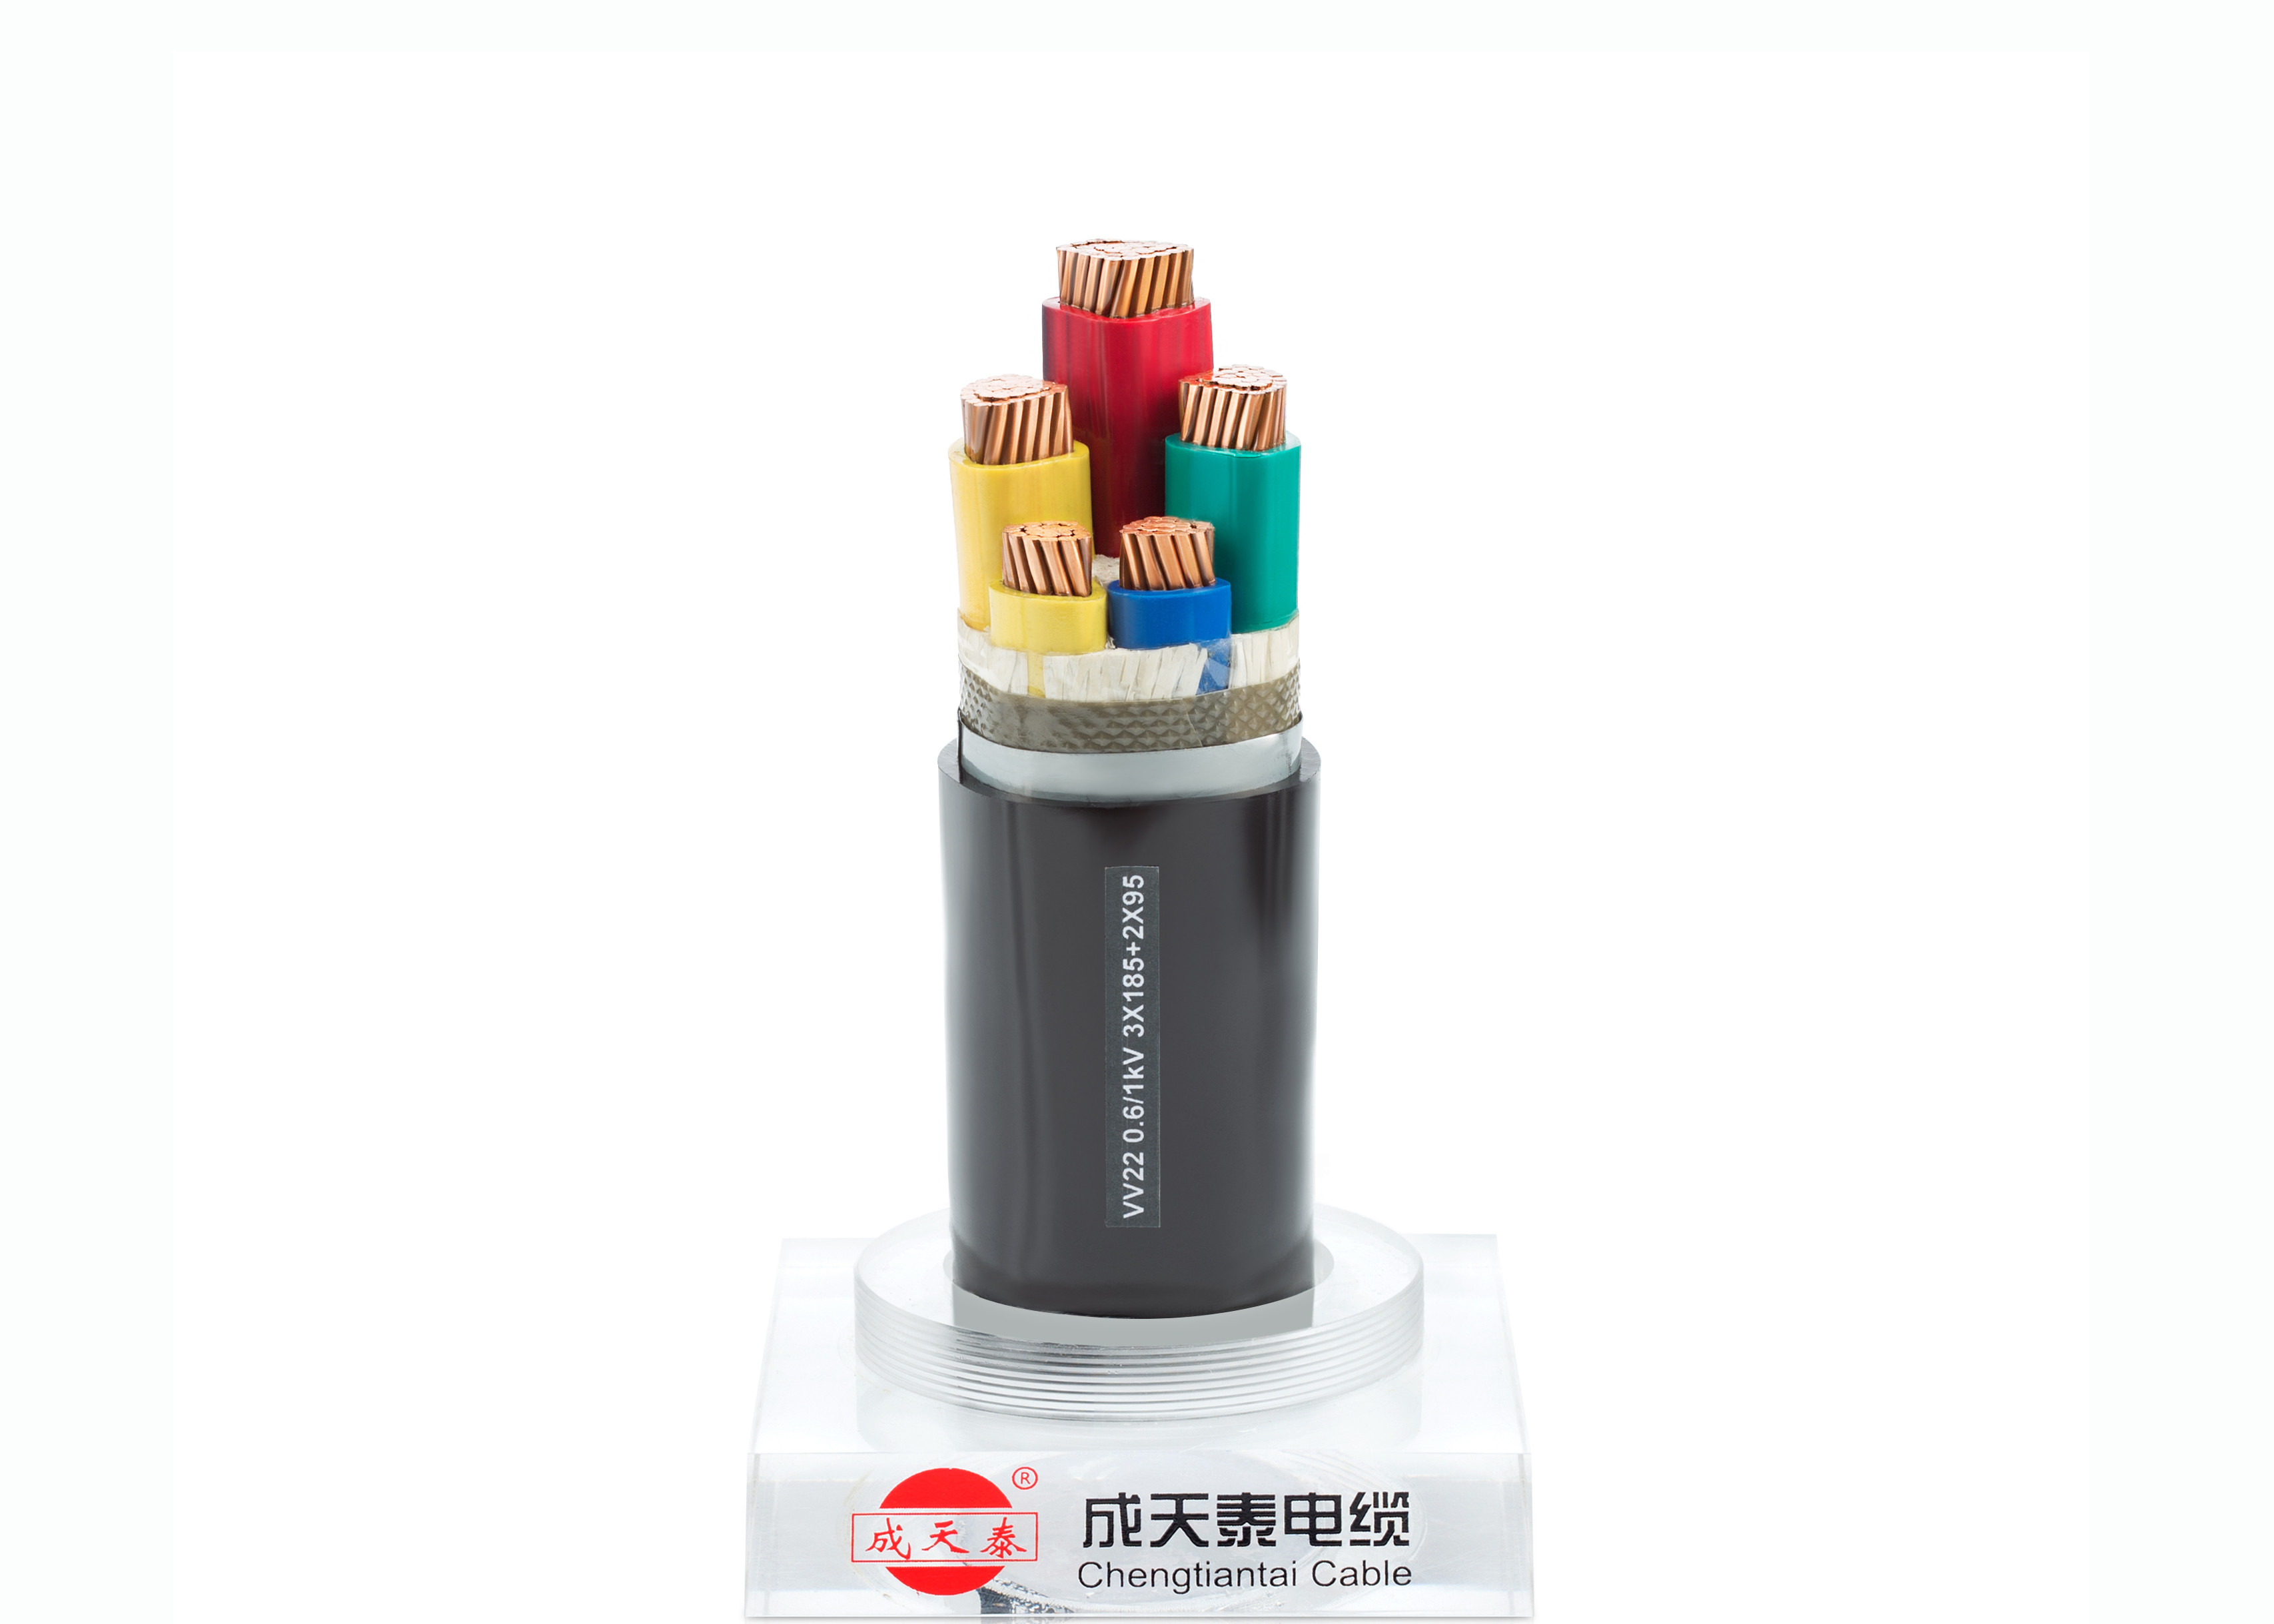 Low Voltage Power Cable 3+2 core 0.6/1 kV Copper Electrical cables PVC Insulation and Sheathed